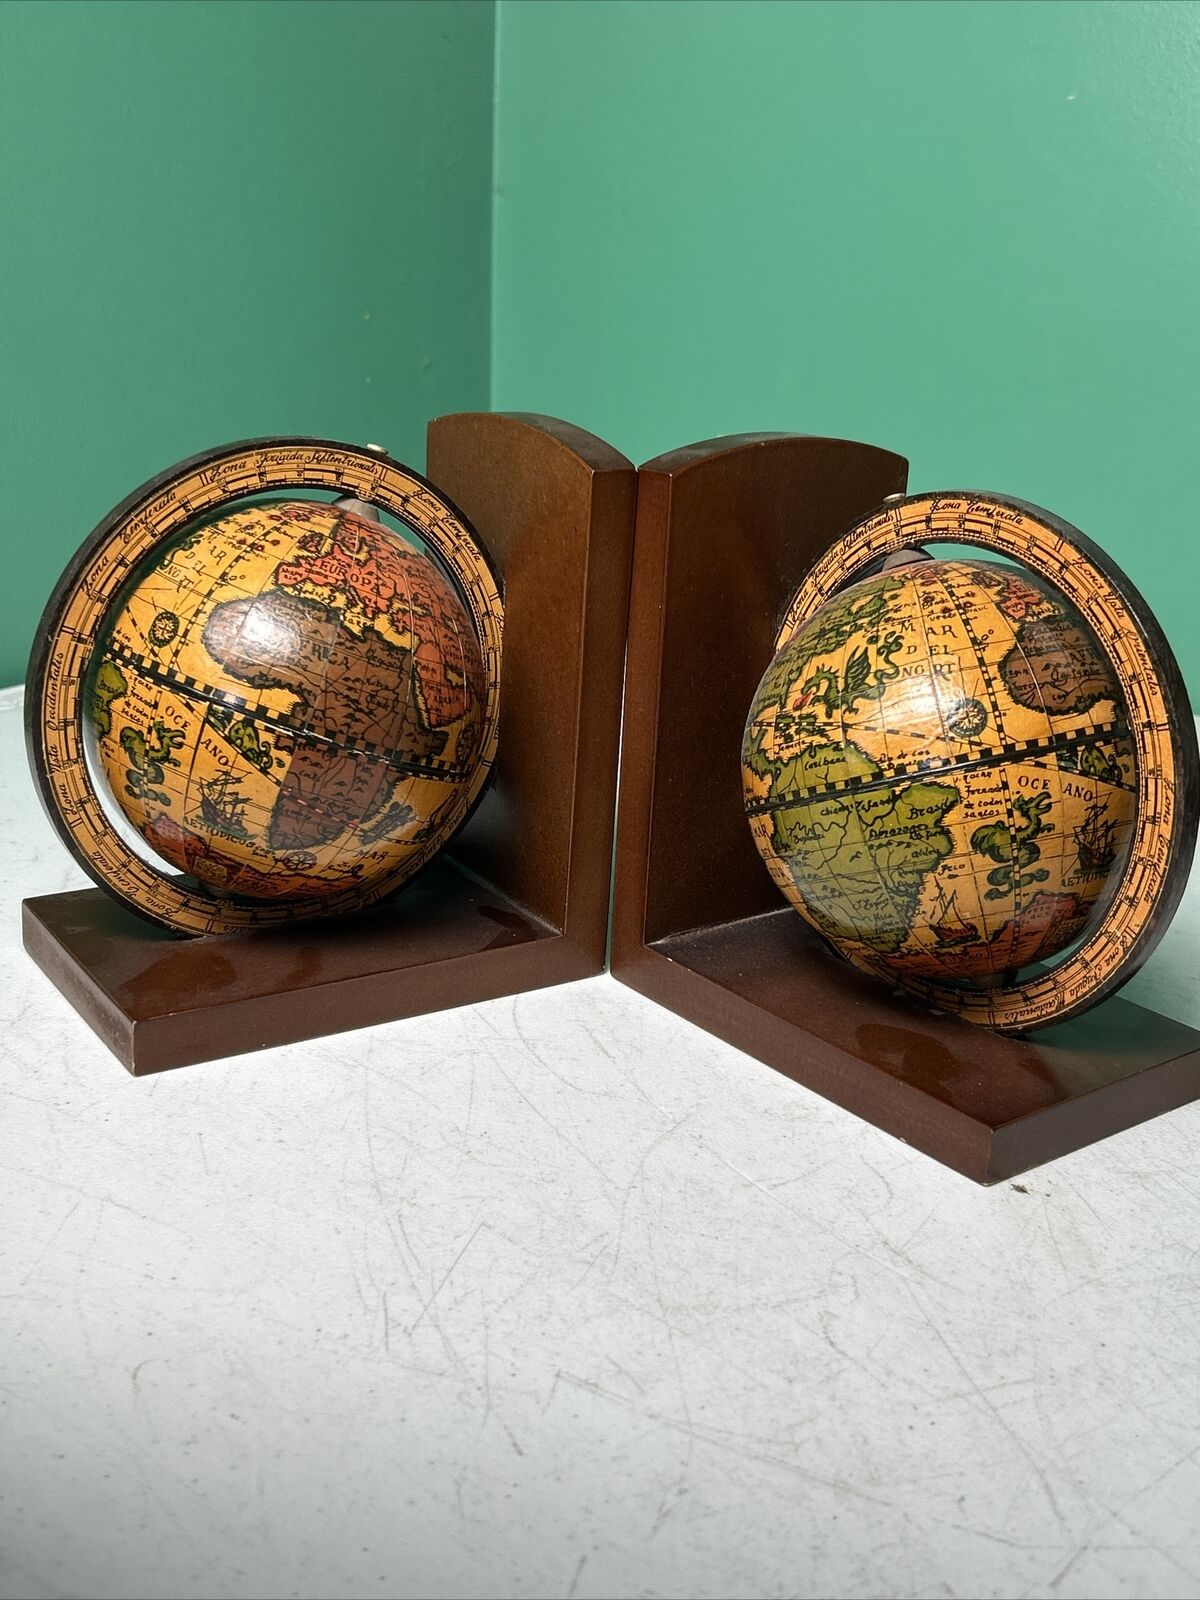 Vtg Olde World Wood Spinning Globe Bookends Made in Italy Dragons Ships Old Pair